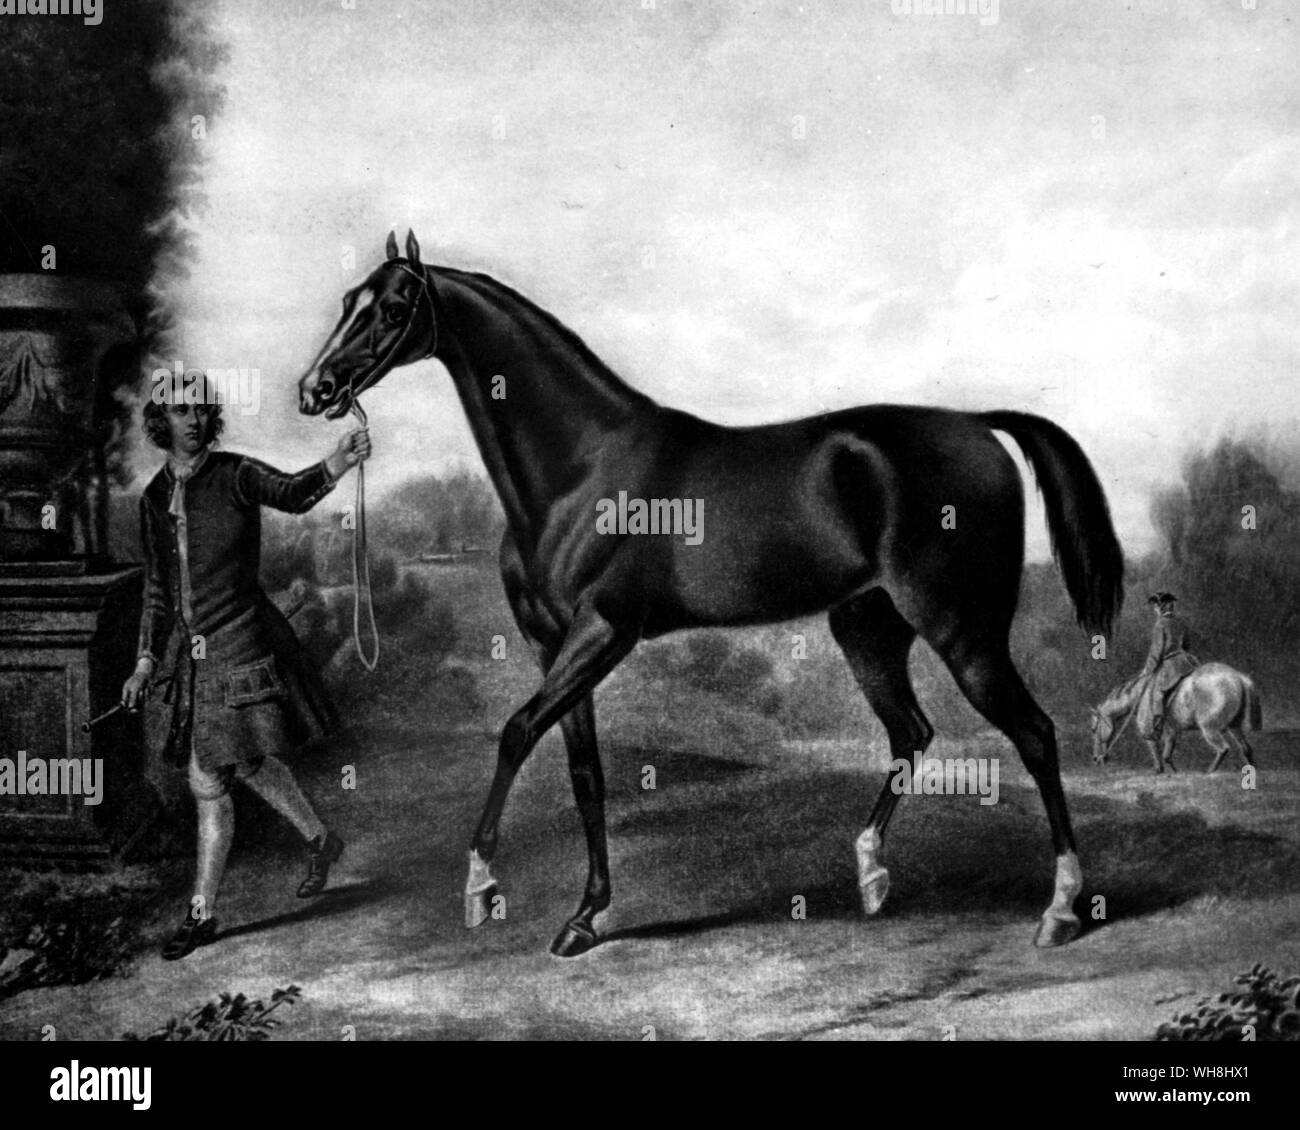 The Darley Arabian. This horse was foaled in 1700. he was about 20 years younger than Byerley's. He was bought by Thomas Darley in Aleppo in 1704, who sent him to his brother Richard at Aldby, Yorkshire. He stood there until 1730, latterly the property of John Brewster Darley. One of his sons was Bulle Rock, the first thoroughbred to go to America. Others were the two Childers, one of the first great thoroughbred racehorses, the other the progenitor, by Eclipse, of most of today's thoroughbreds (see pp. 78-80). Thoroughbred racehorses are descended from Arab stallions.. The History of Horse Stock Photo